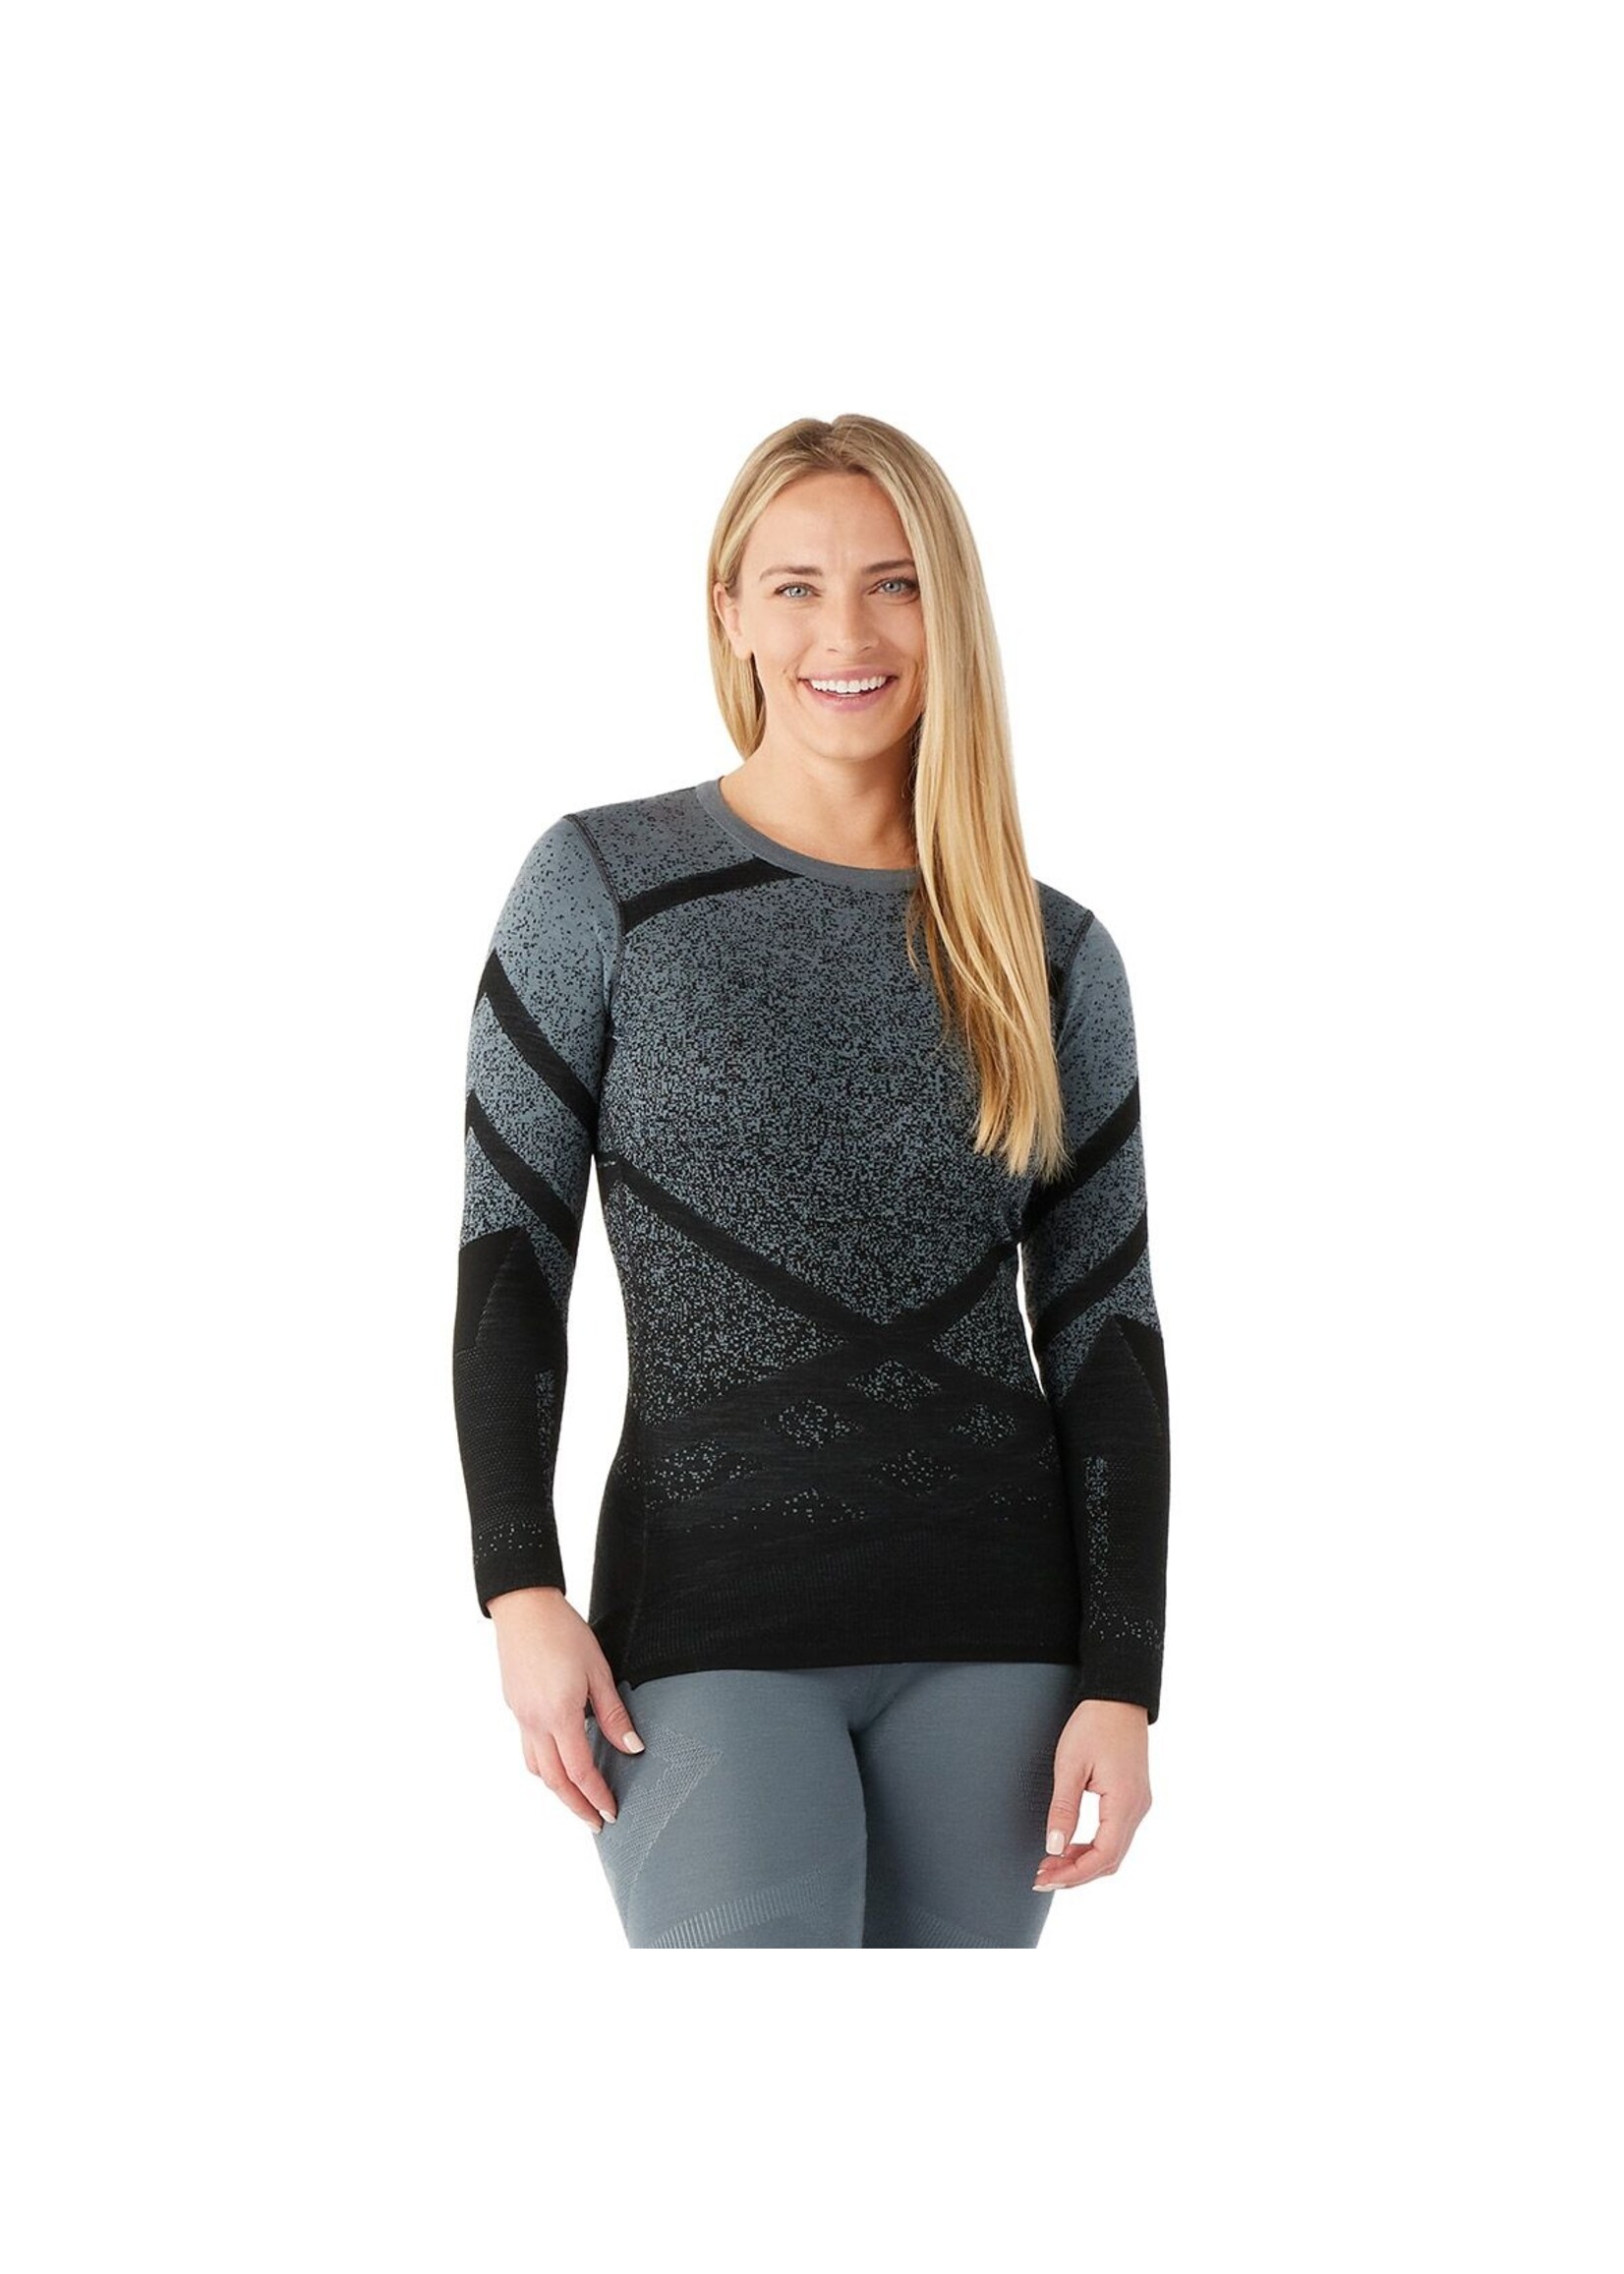 Women's Intraknit Merino Patterned Round Neck Thermal Base Top - Lacroix  espace boutique inc.